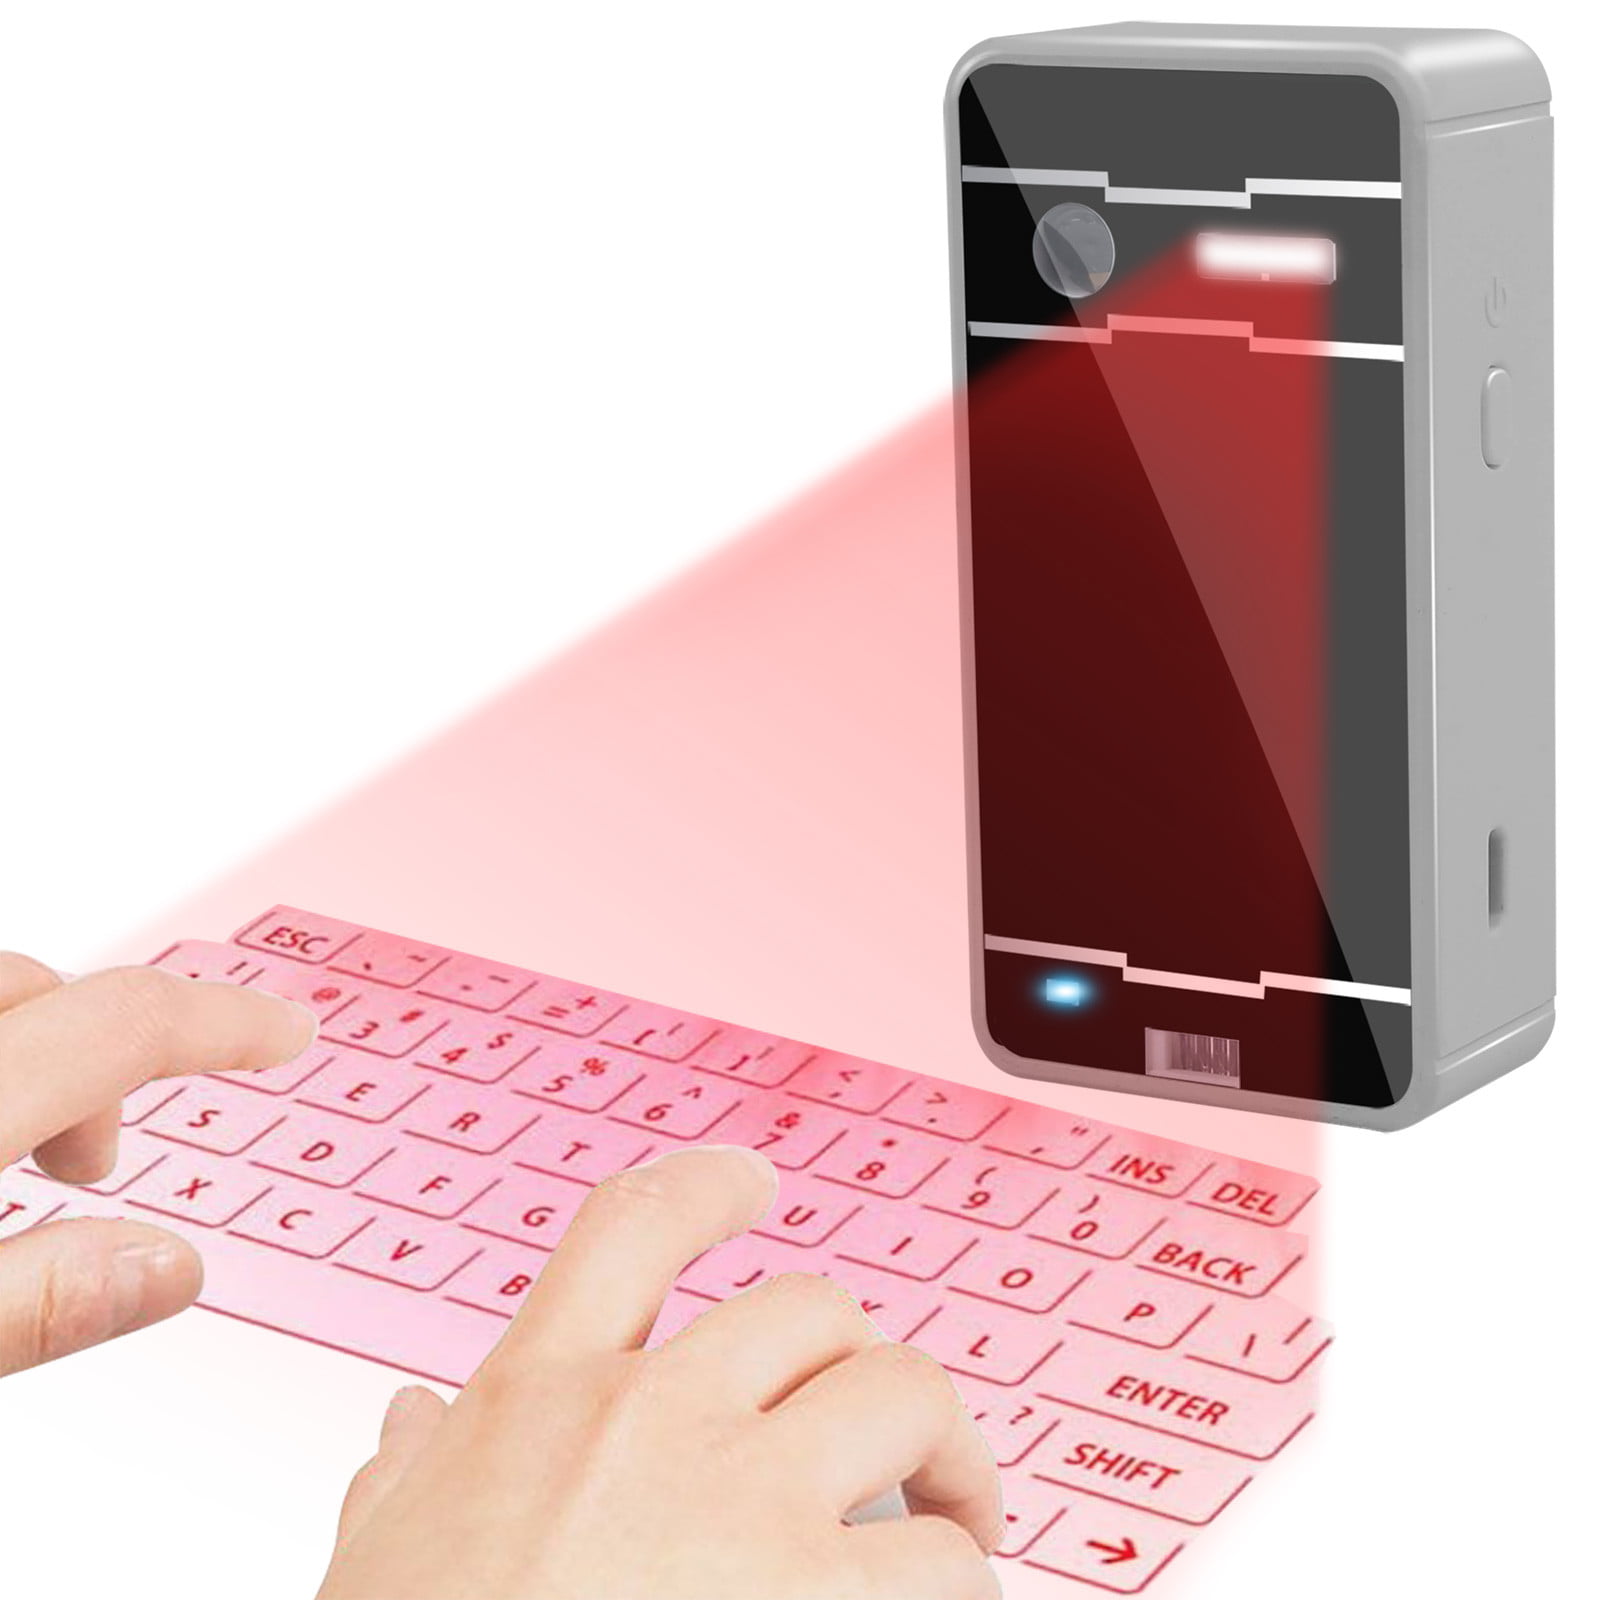 MY-COSE Bluetooth Laser Keyboard Mouse,Virtual Wireless Portable Projection Keypad,Full Keyboard Layout Fast Accurate Data,for Smartphone and Tablets New,White 